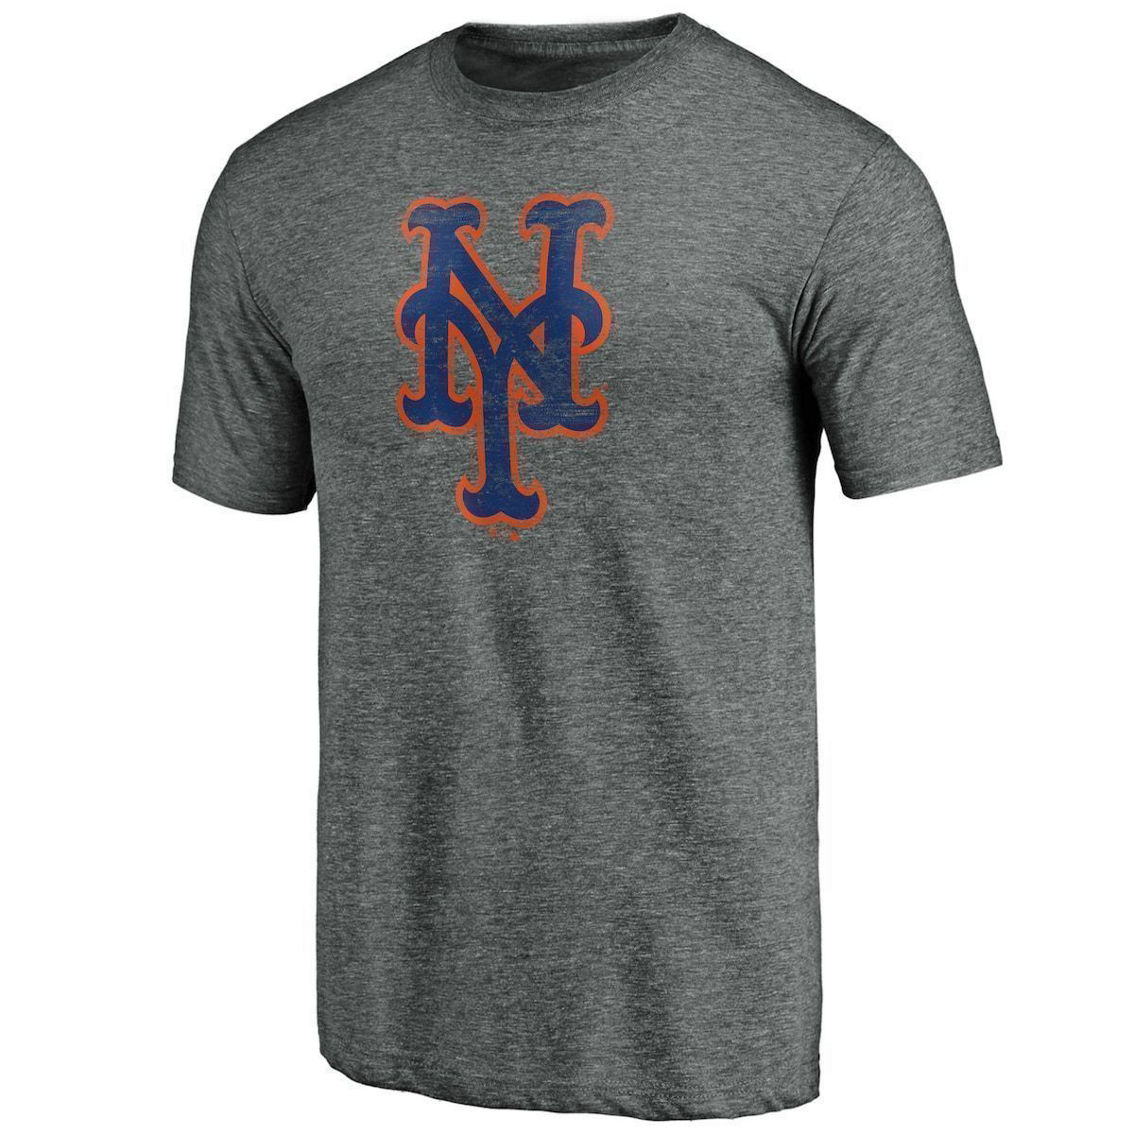 Fanatics Branded Men's Heathered Gray New York Mets Weathered Official Logo Tri-Blend T-Shirt - Image 3 of 4